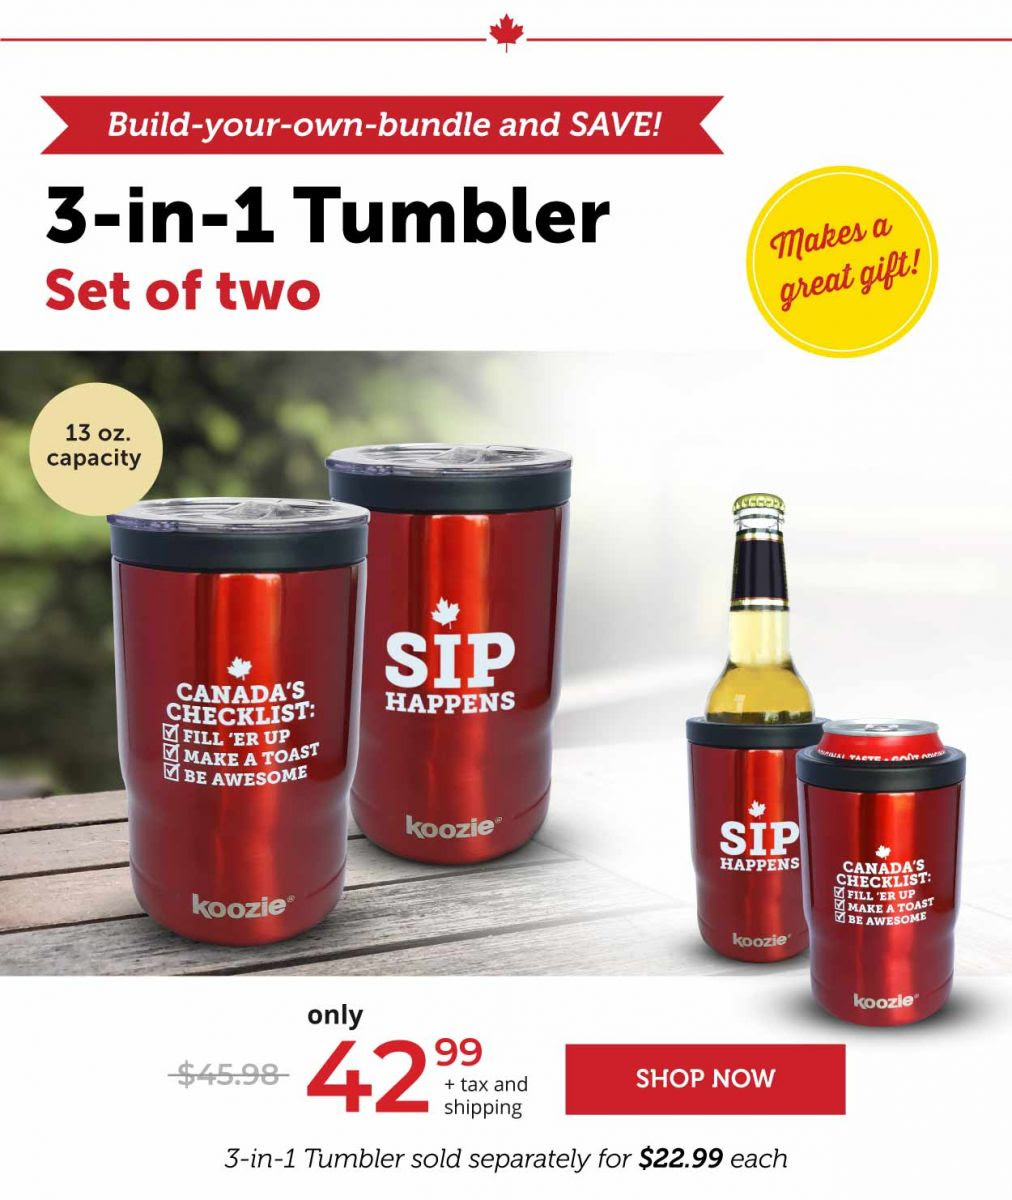 3-in-1 Tumbler—set of two